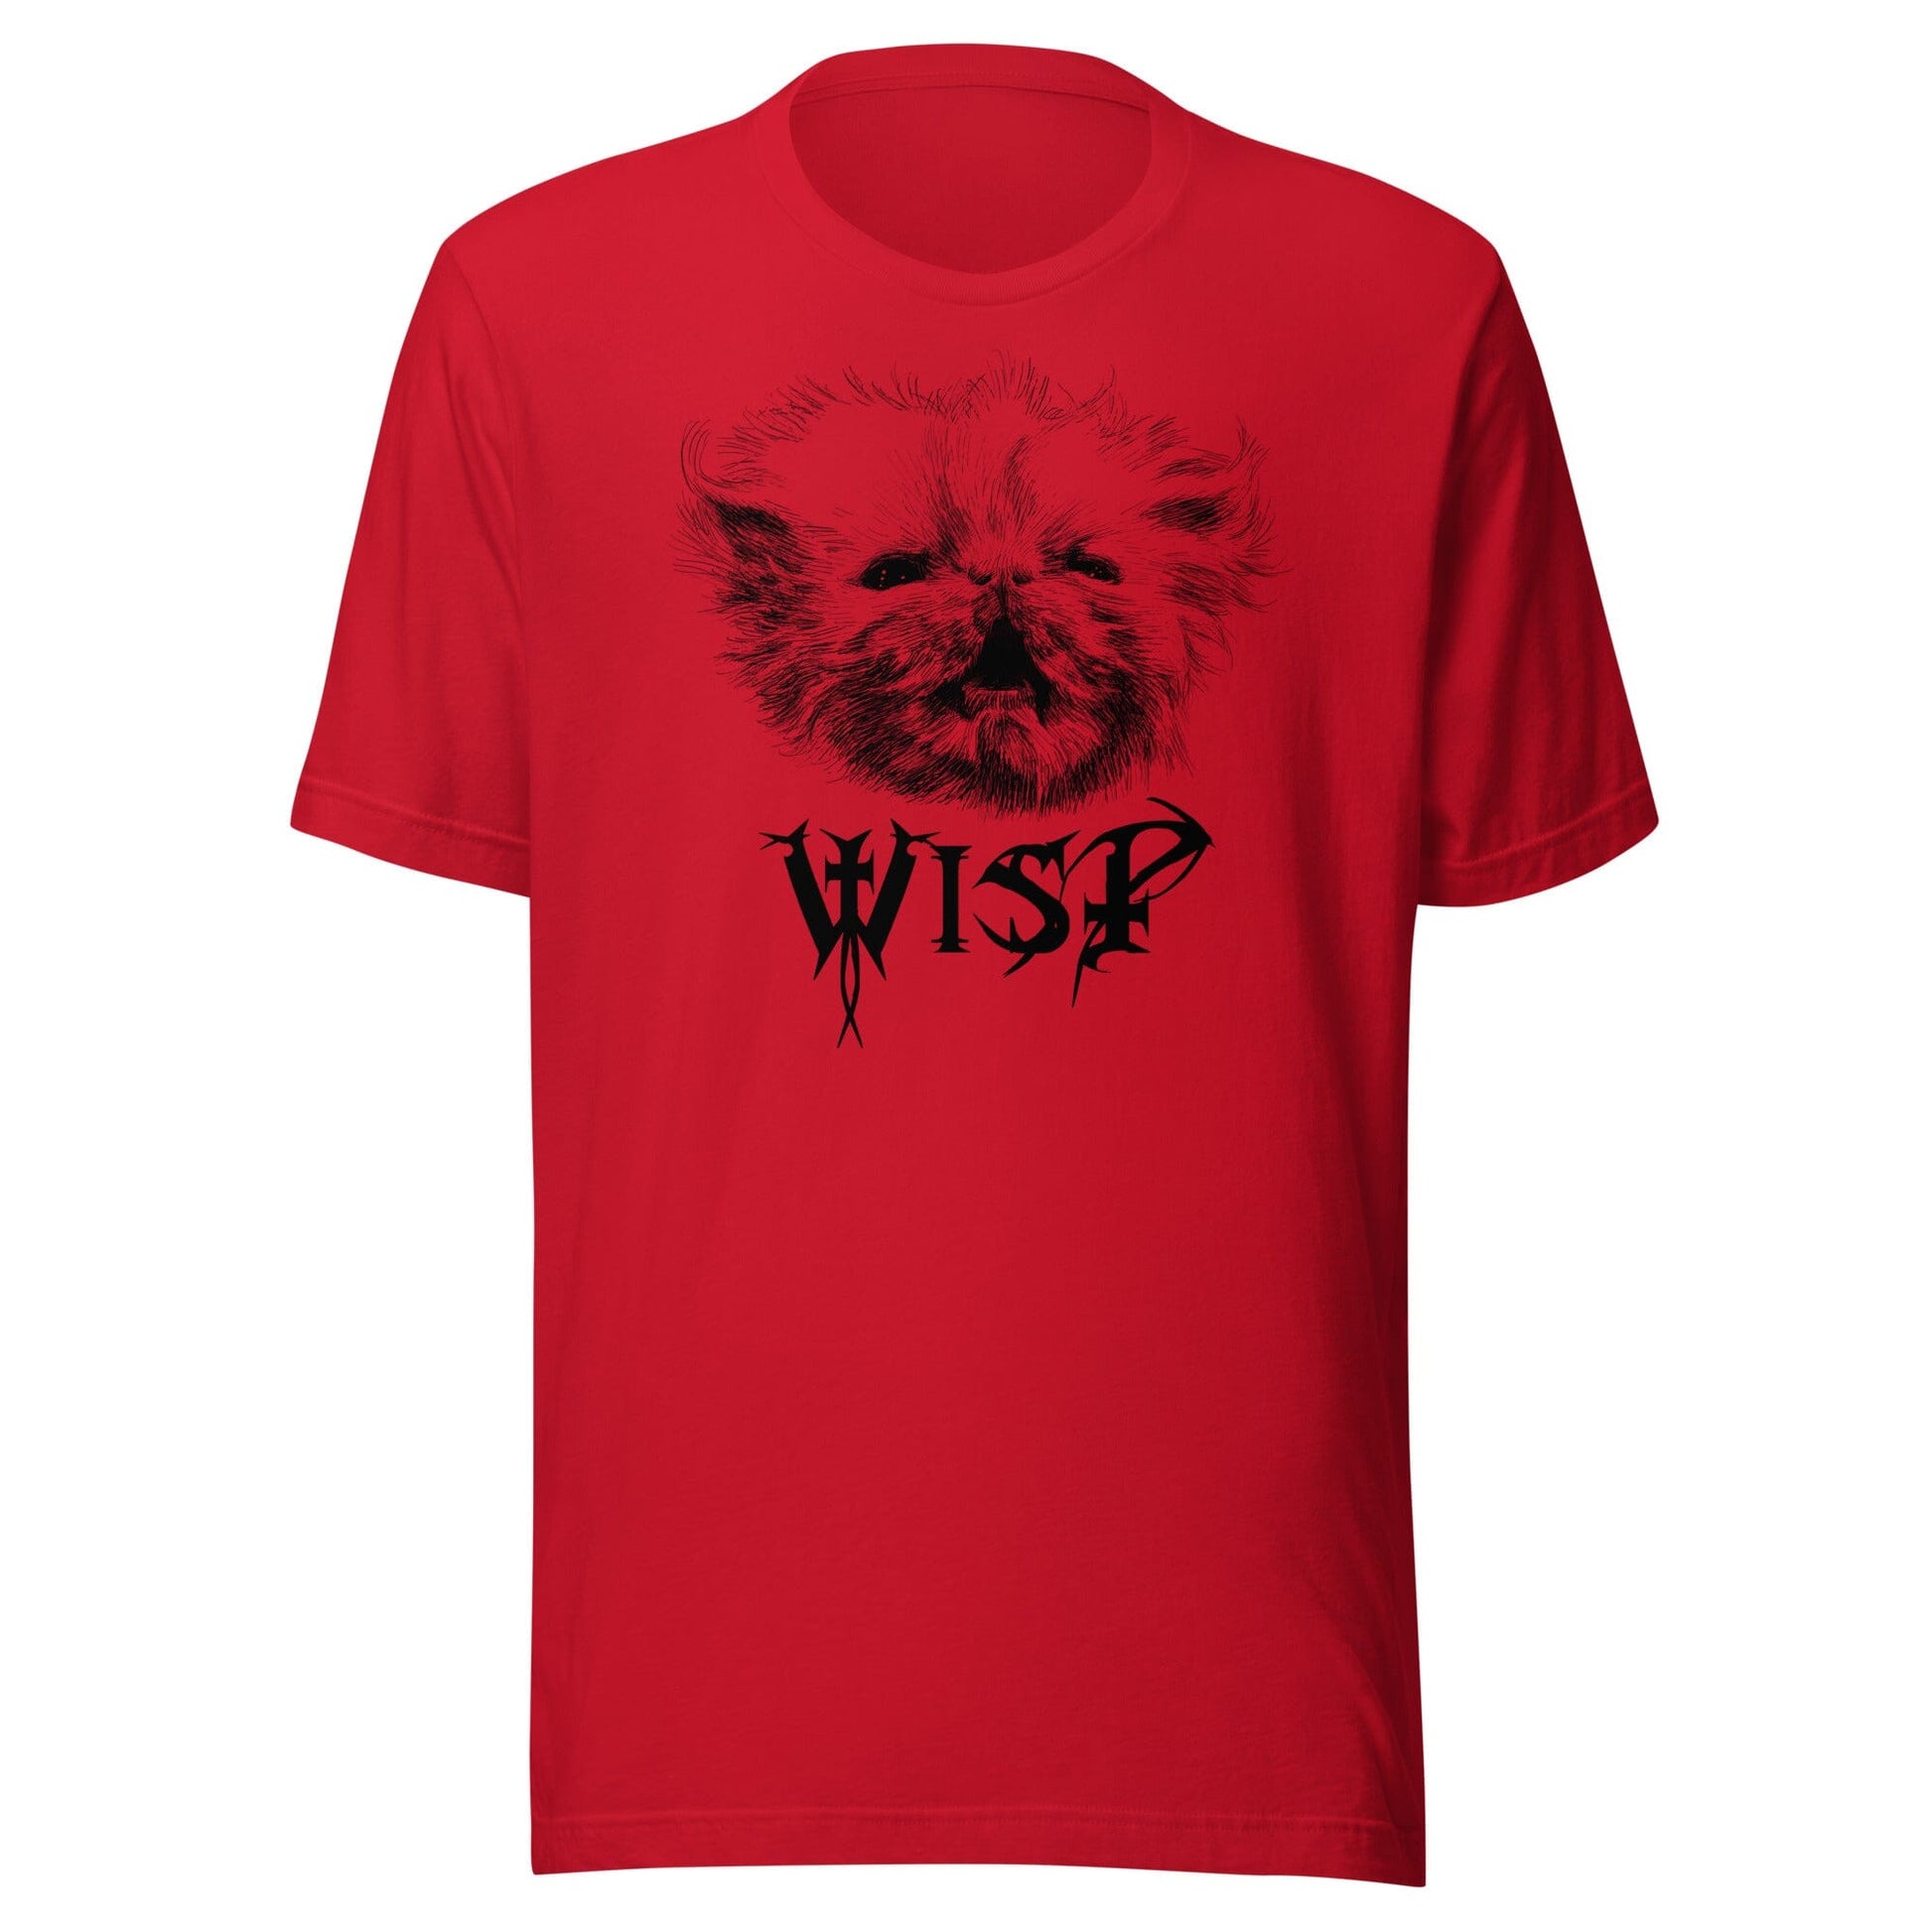 Metal Wisp T-Shirt [Unfoiled] (All net proceeds go to Rags to Riches Animal Rescue) JoyousJoyfulJoyness Red XS 